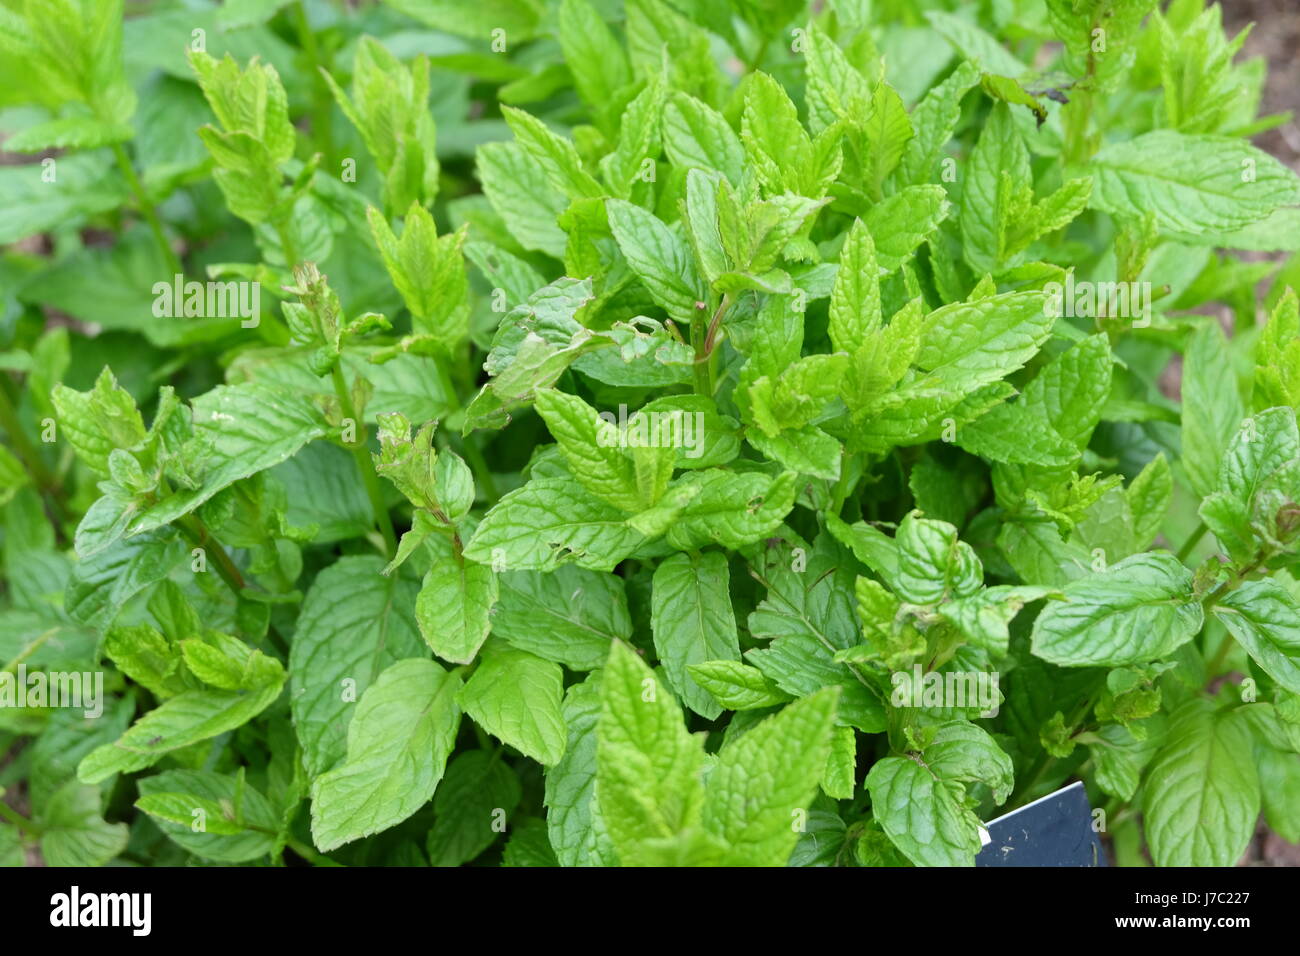 Mint Growing in a Garden Stock Photo